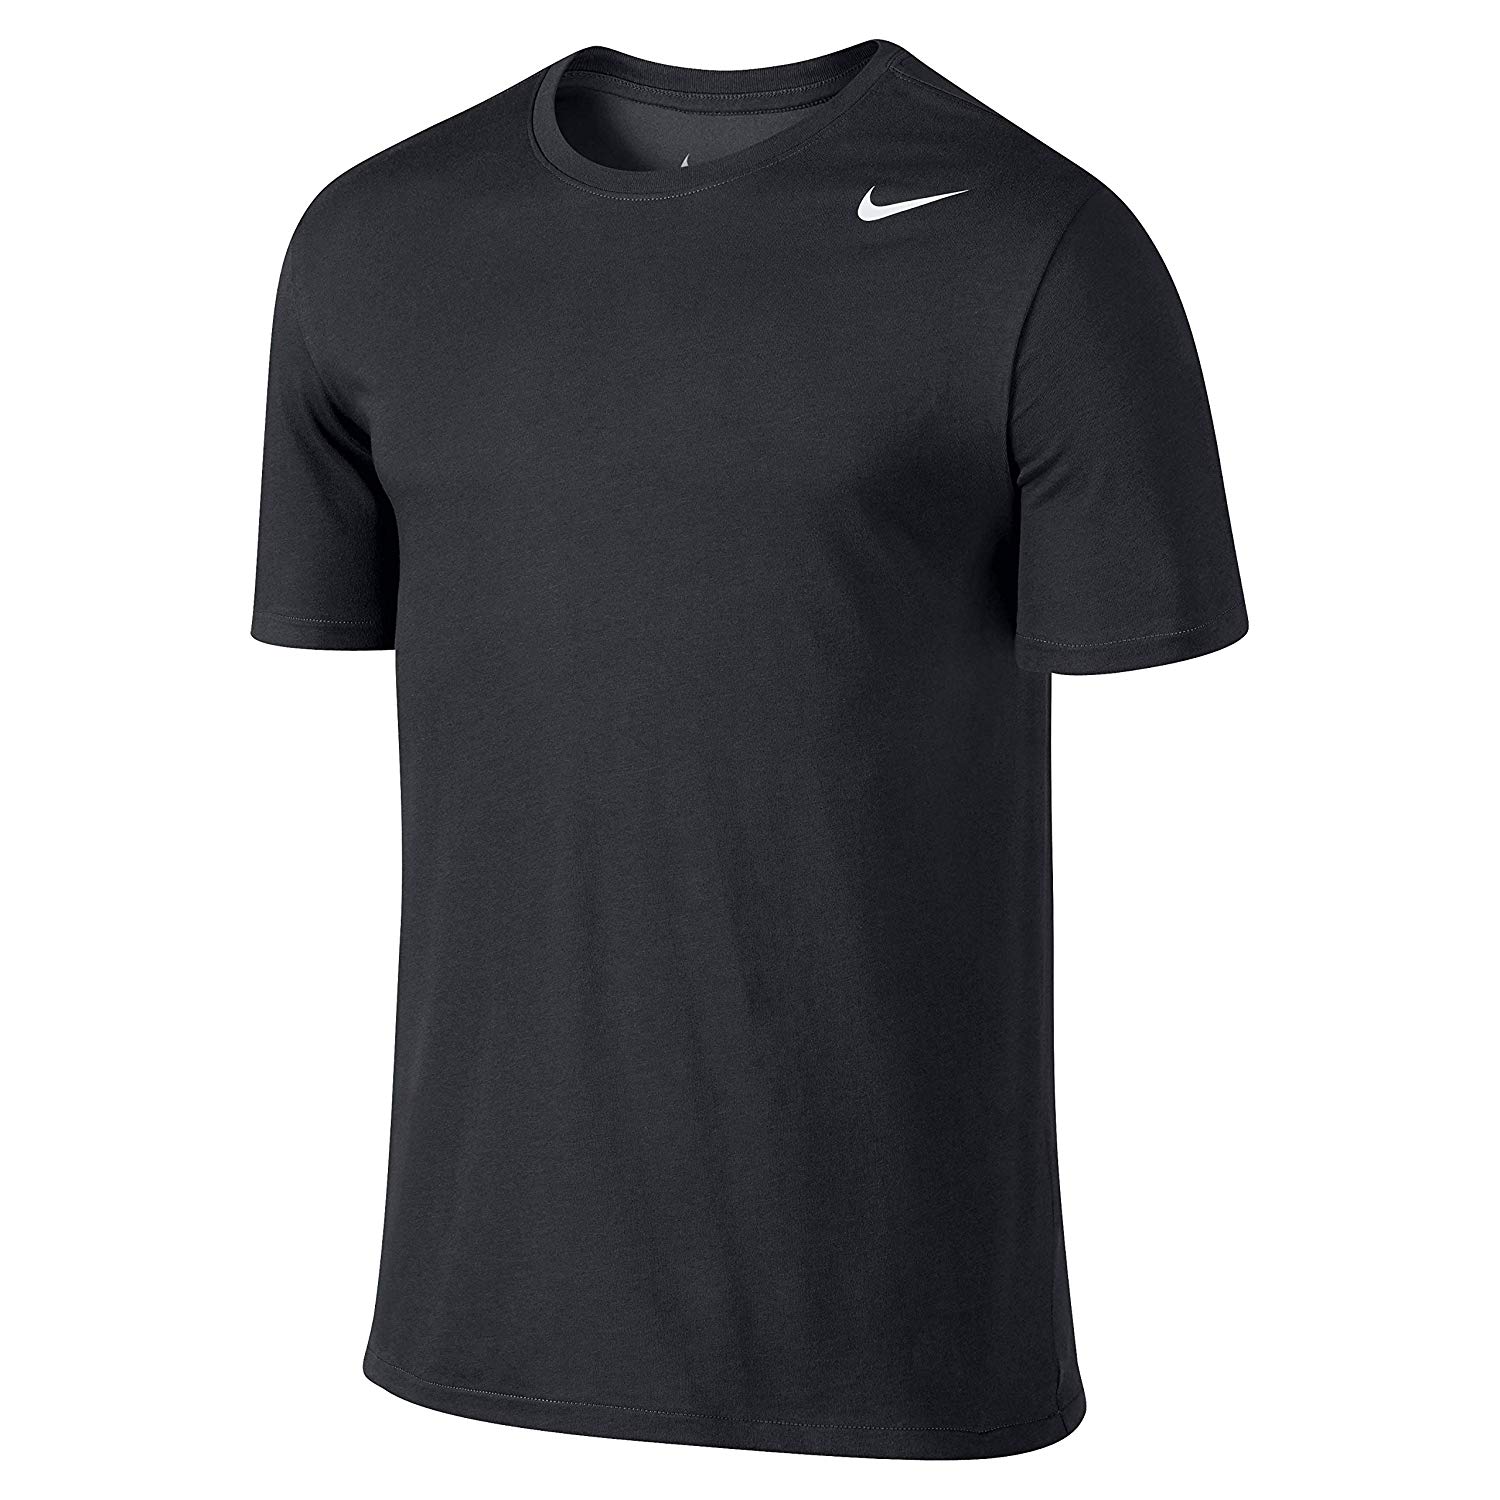 NIKE Men's Dri-FIT Cotton 2.0 Tee was $25, NOW $15! - Become a Coupon Queen